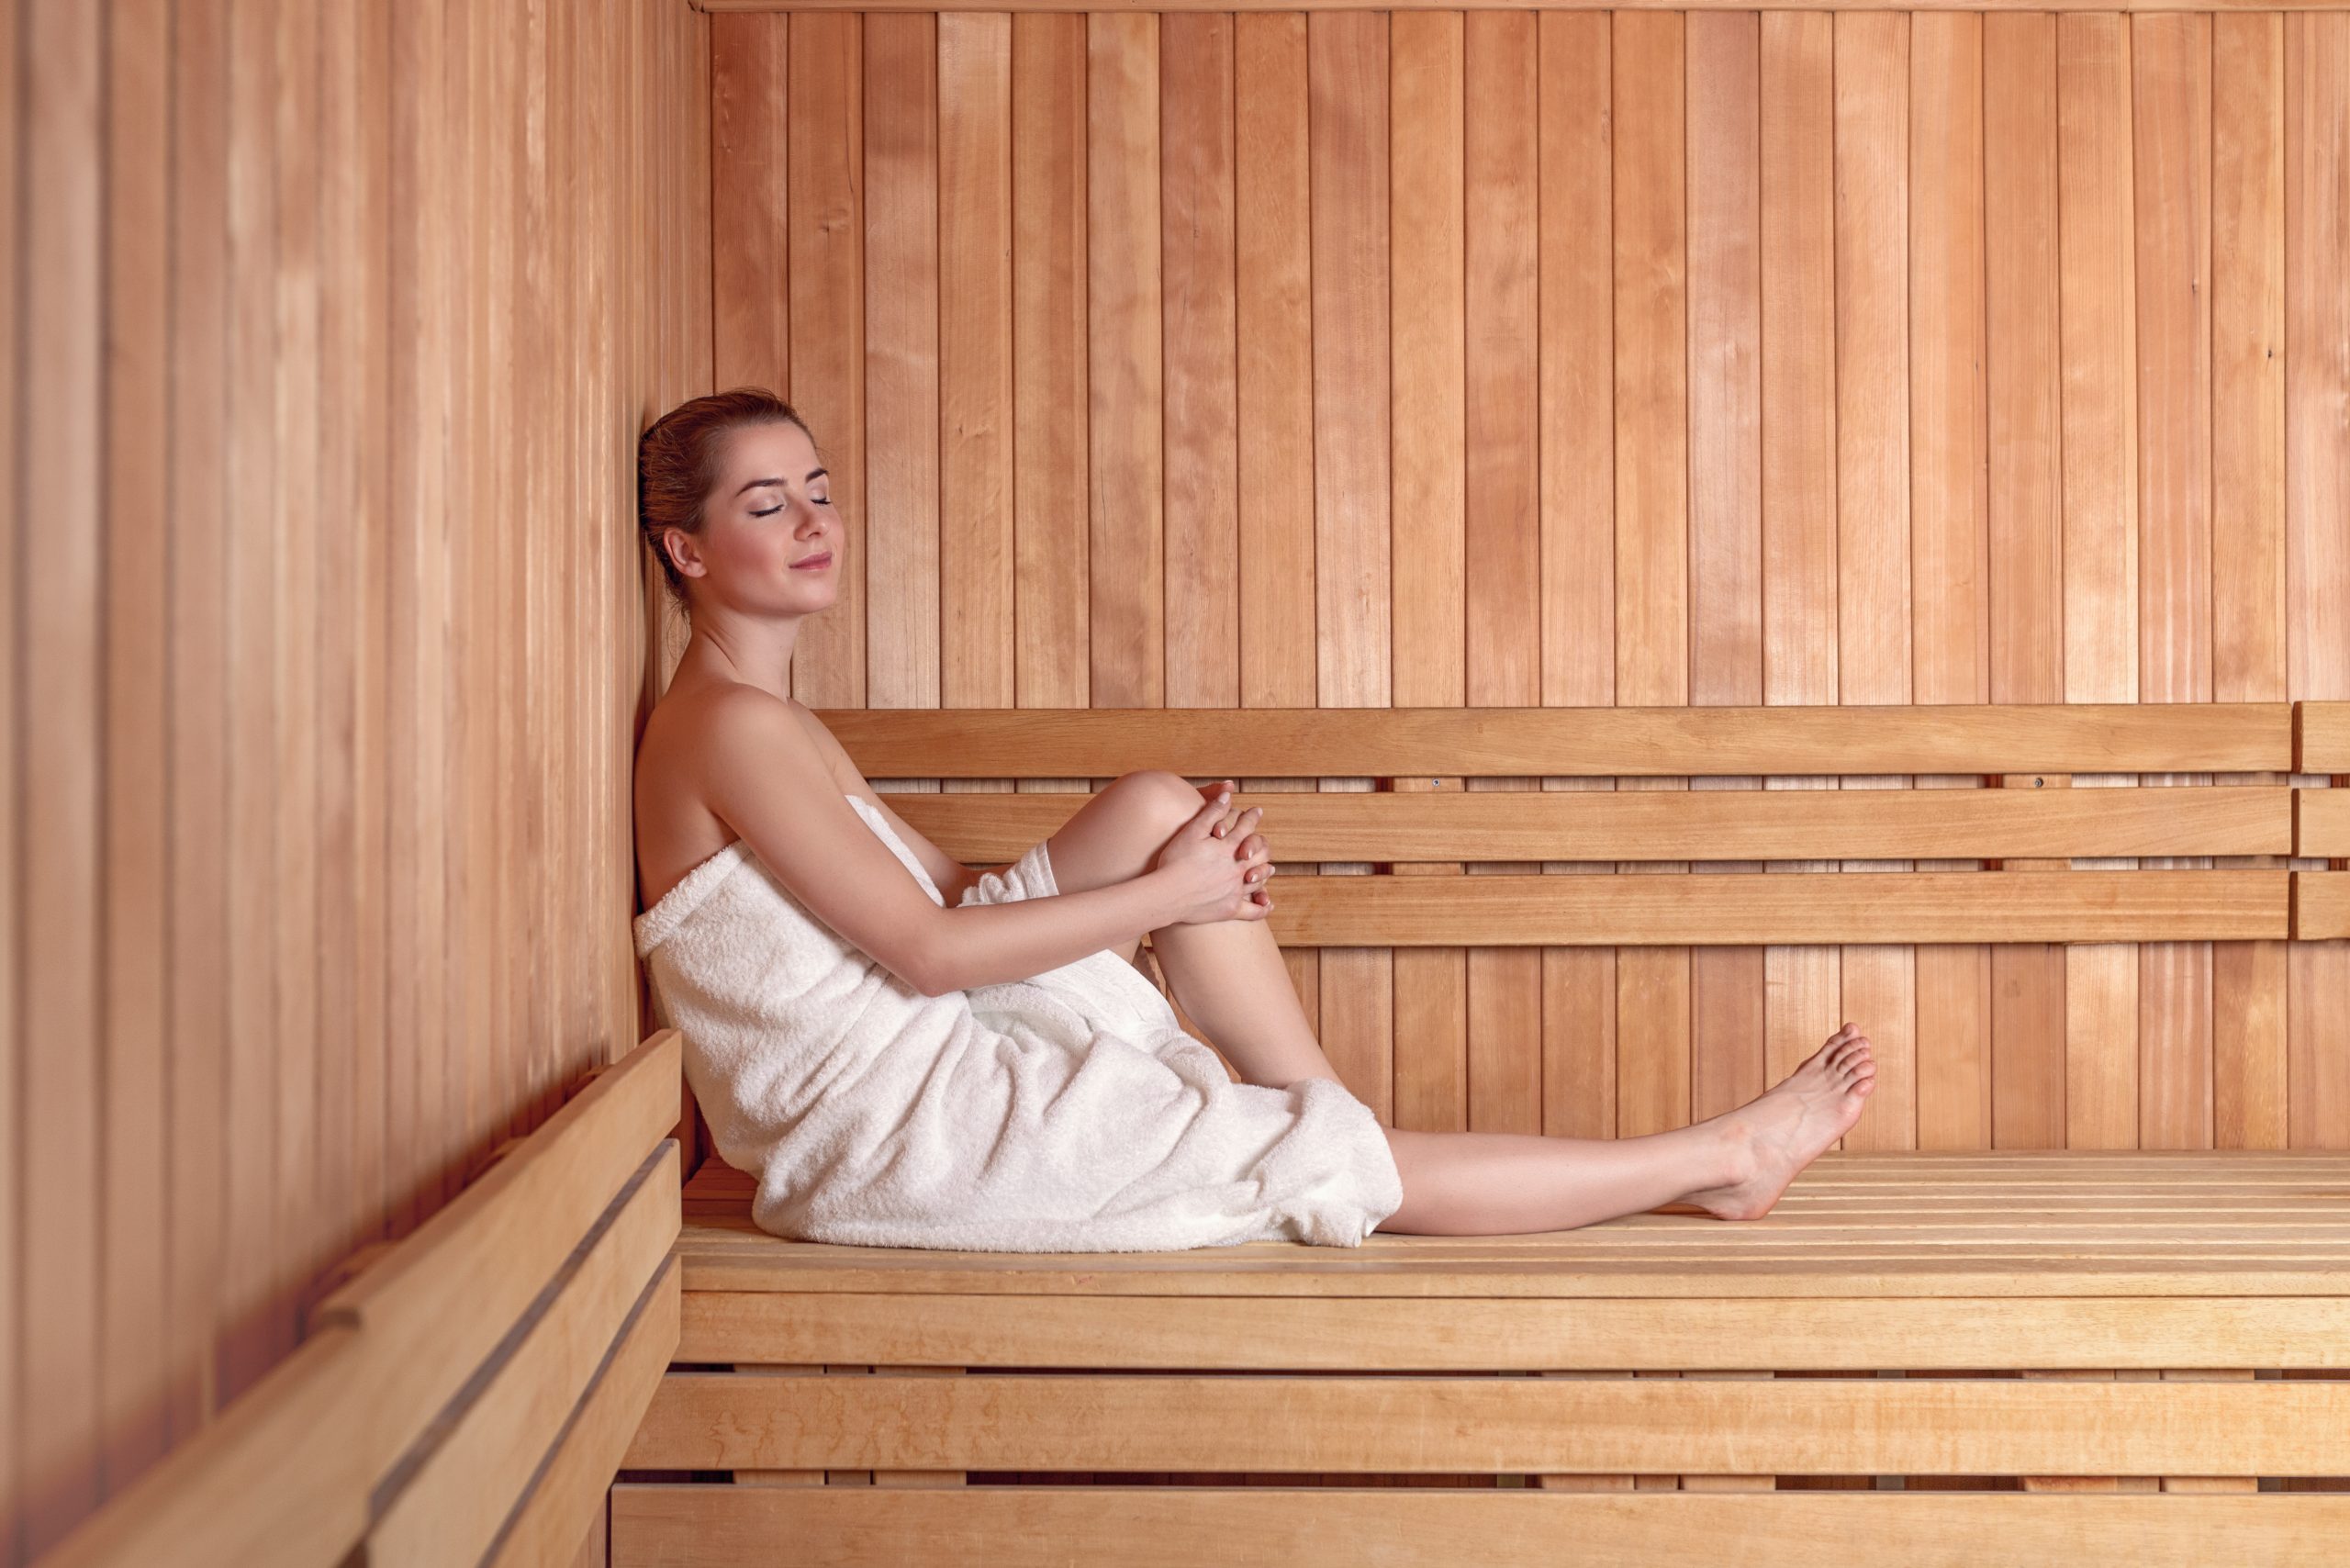 How Long Should You Stay in a Sauna